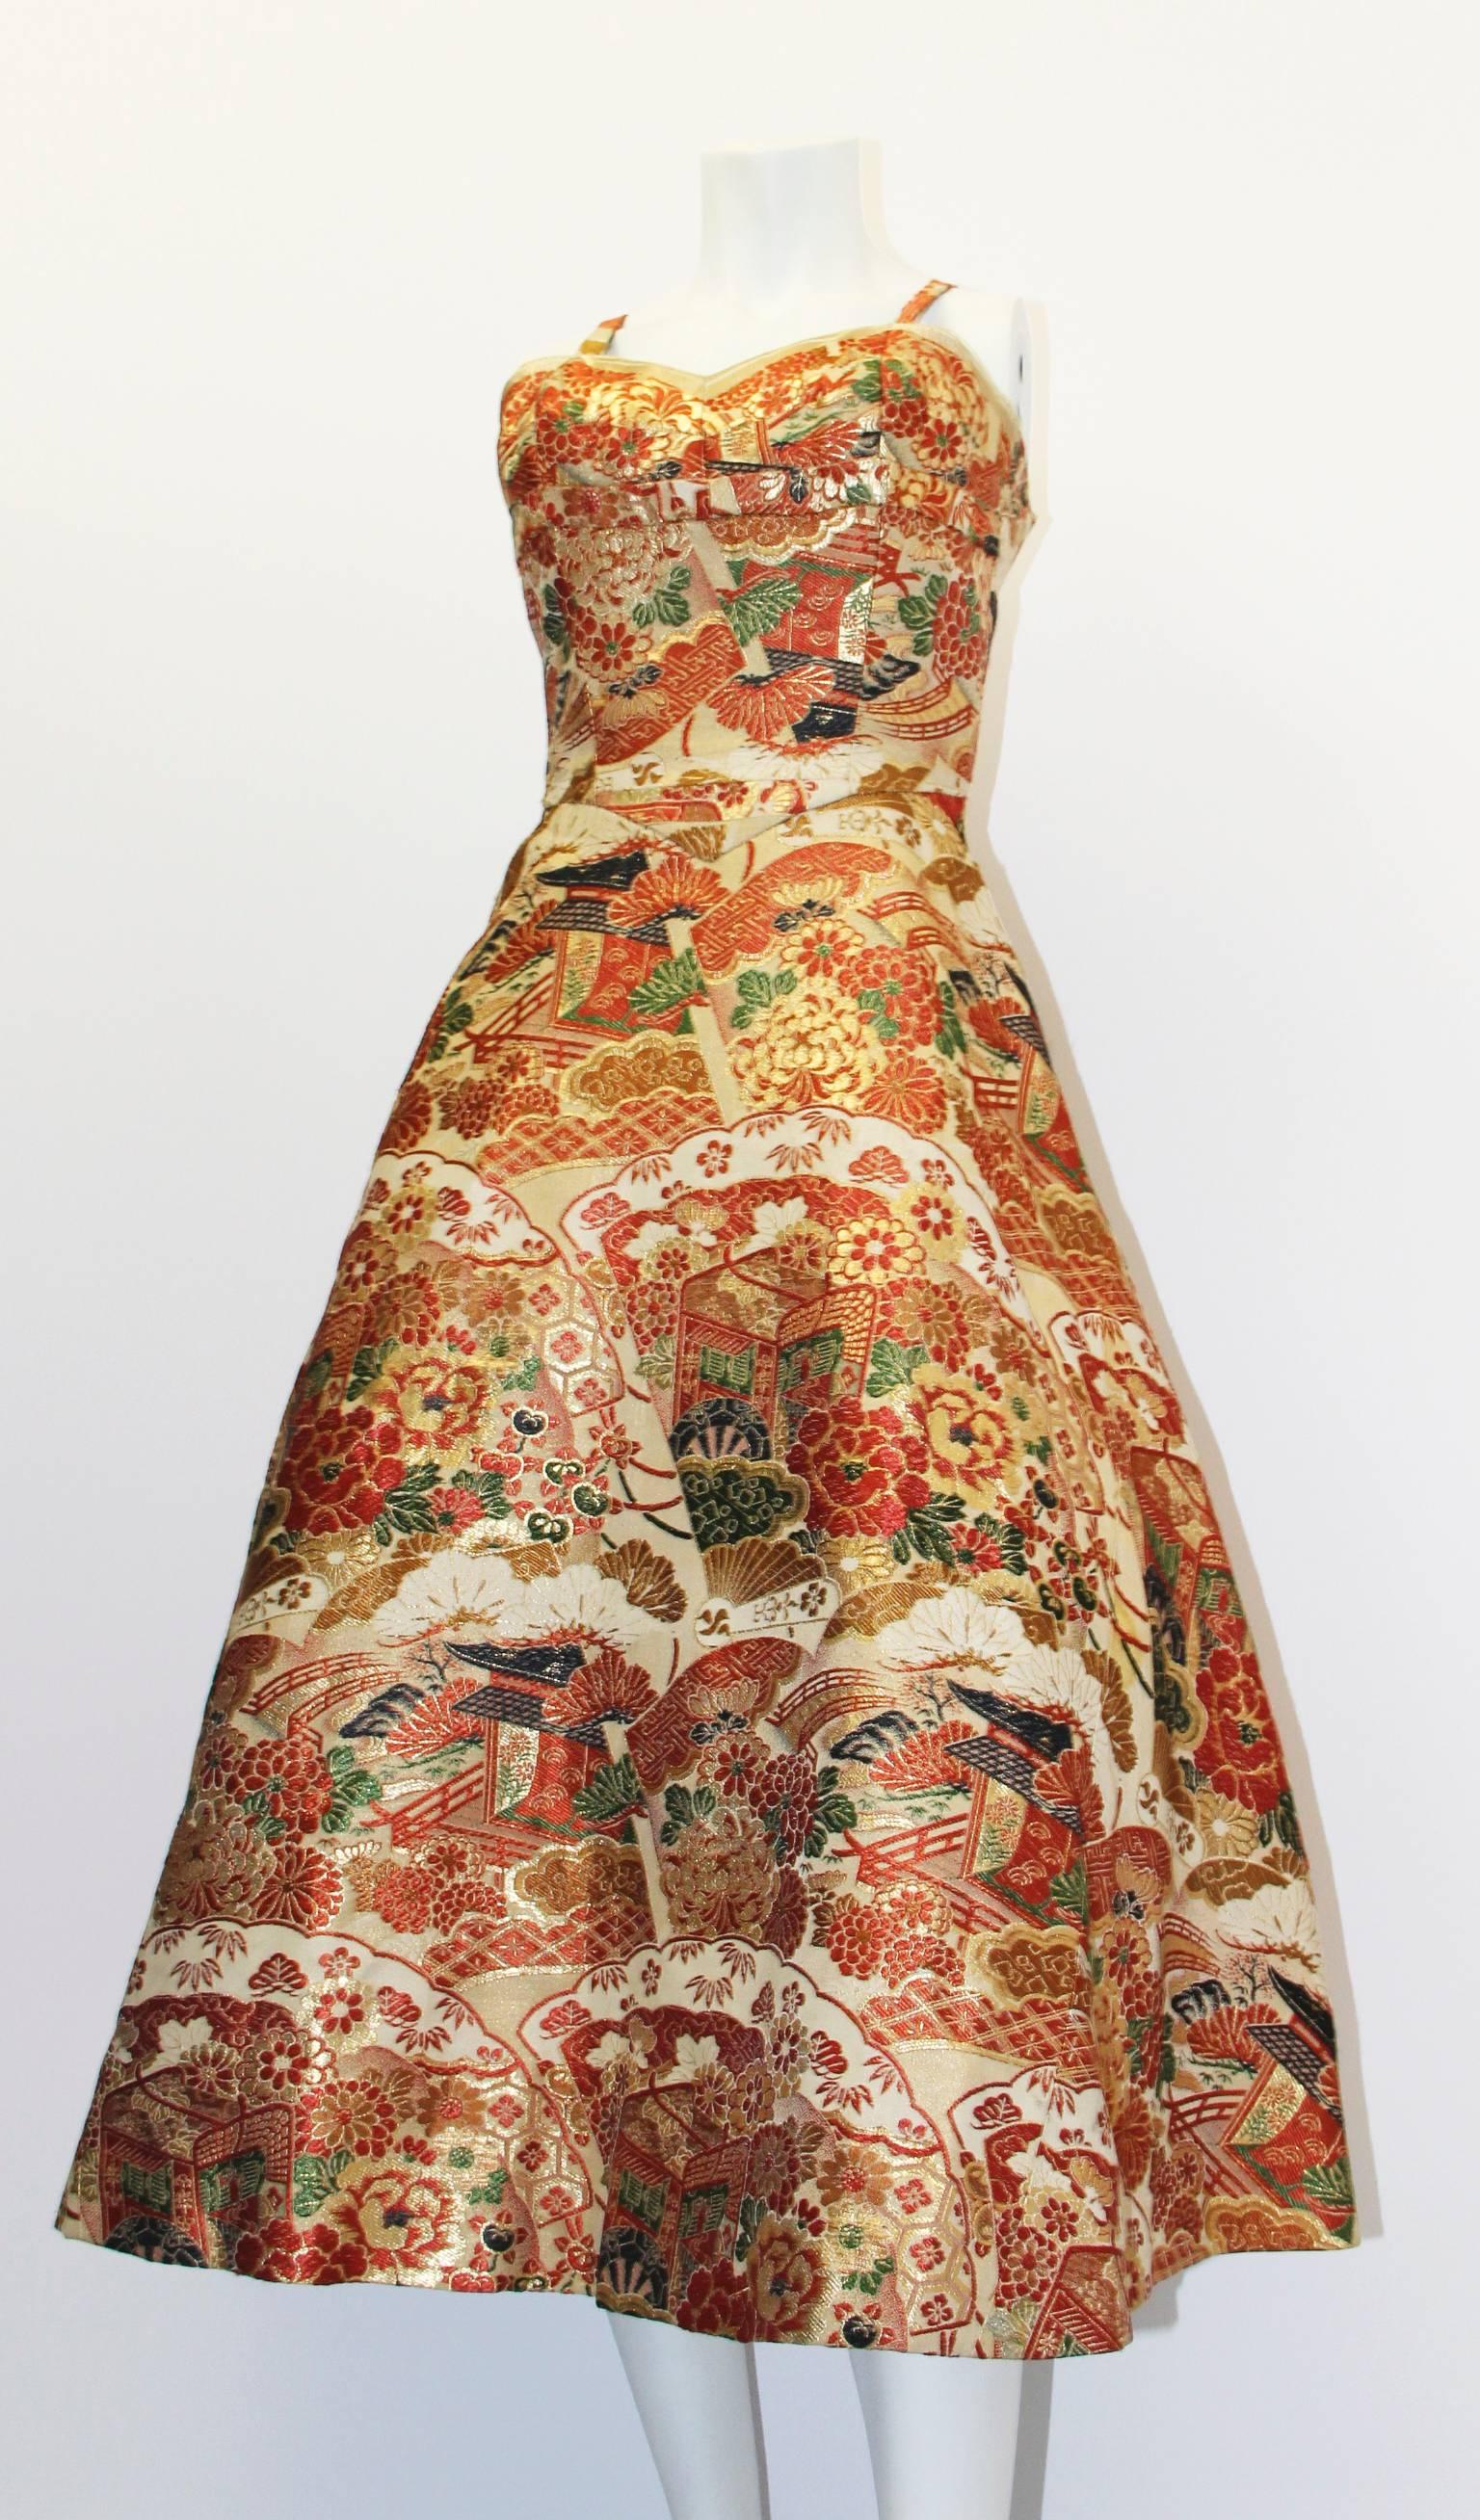 Stunning 1950's Kimono fabric tapestry weight cocktail dress with gold lamé threading throughout. Unusual chinoiserie subject matter. Heavyweight fabric is beautifully constructed into the classic 1950's silhouette with nipped waist, fitted bodice